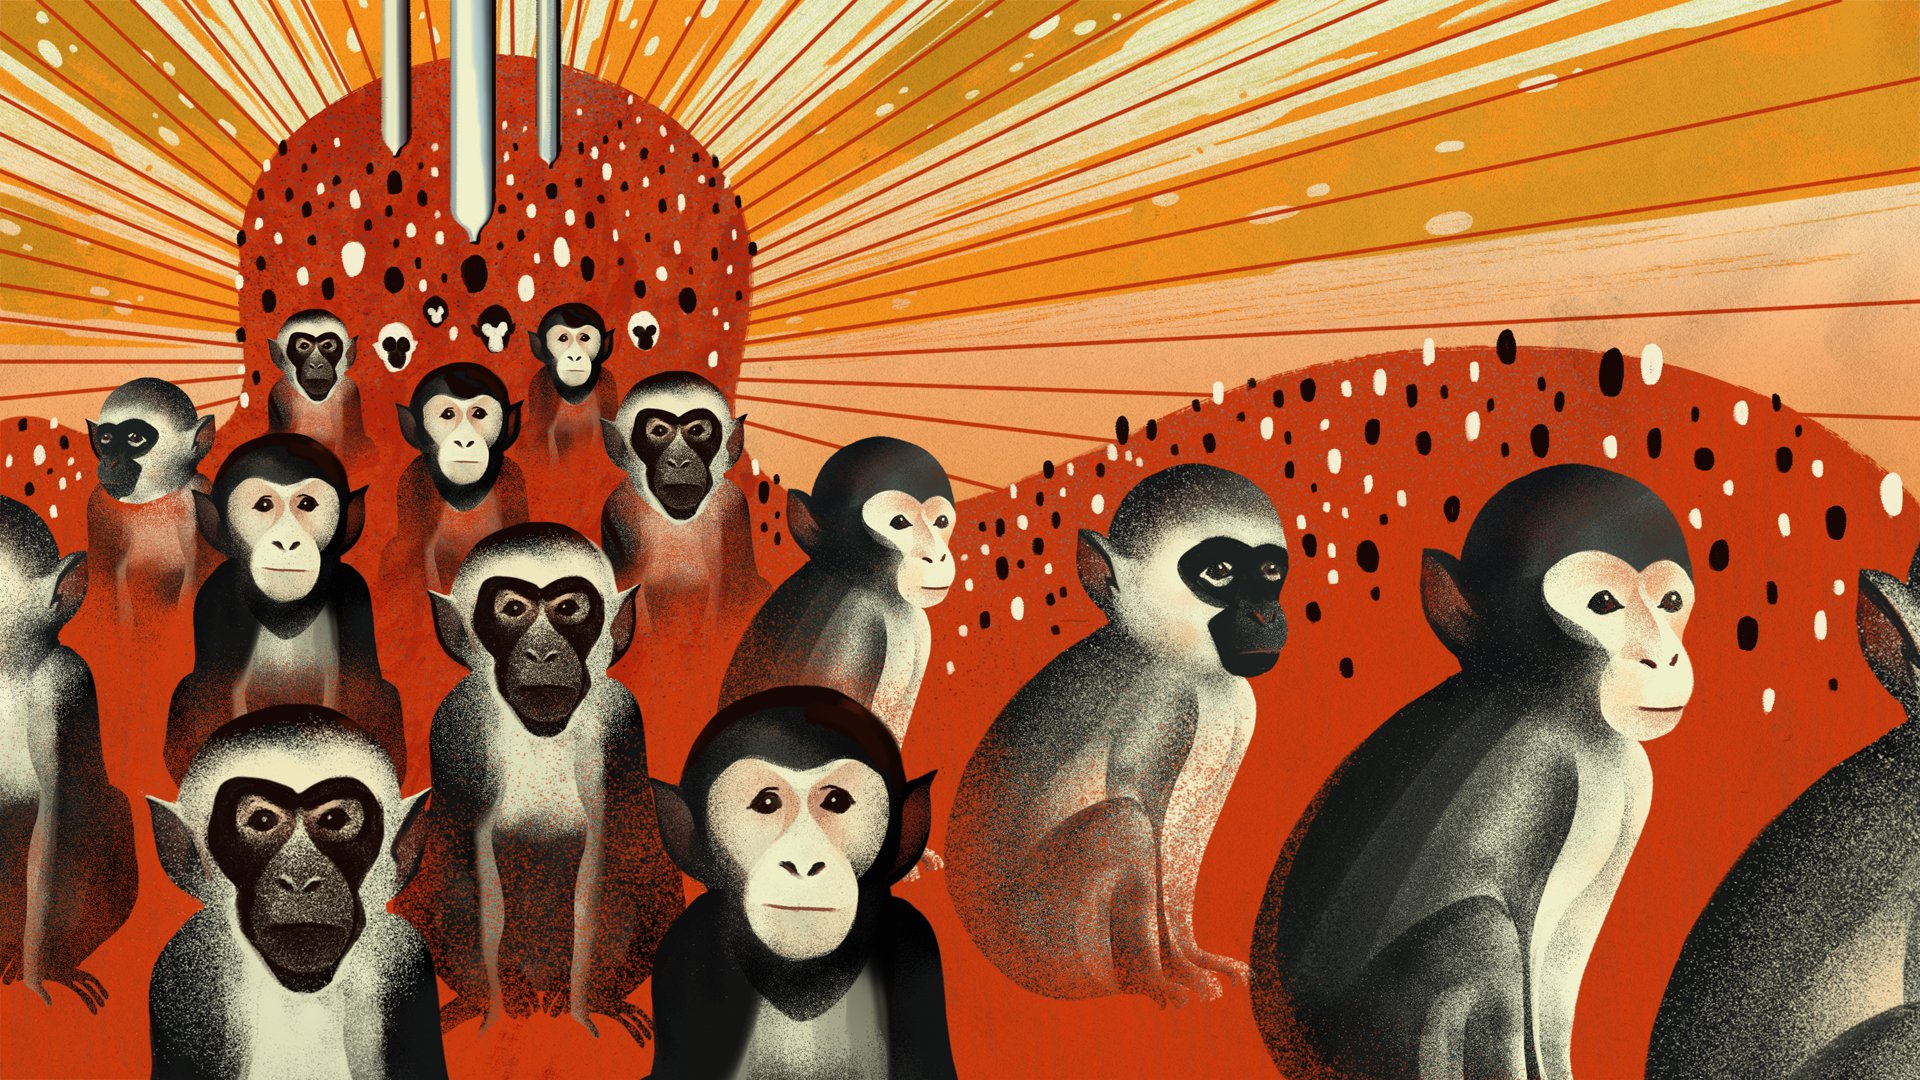 An illustration of monkeys on a red and orange background